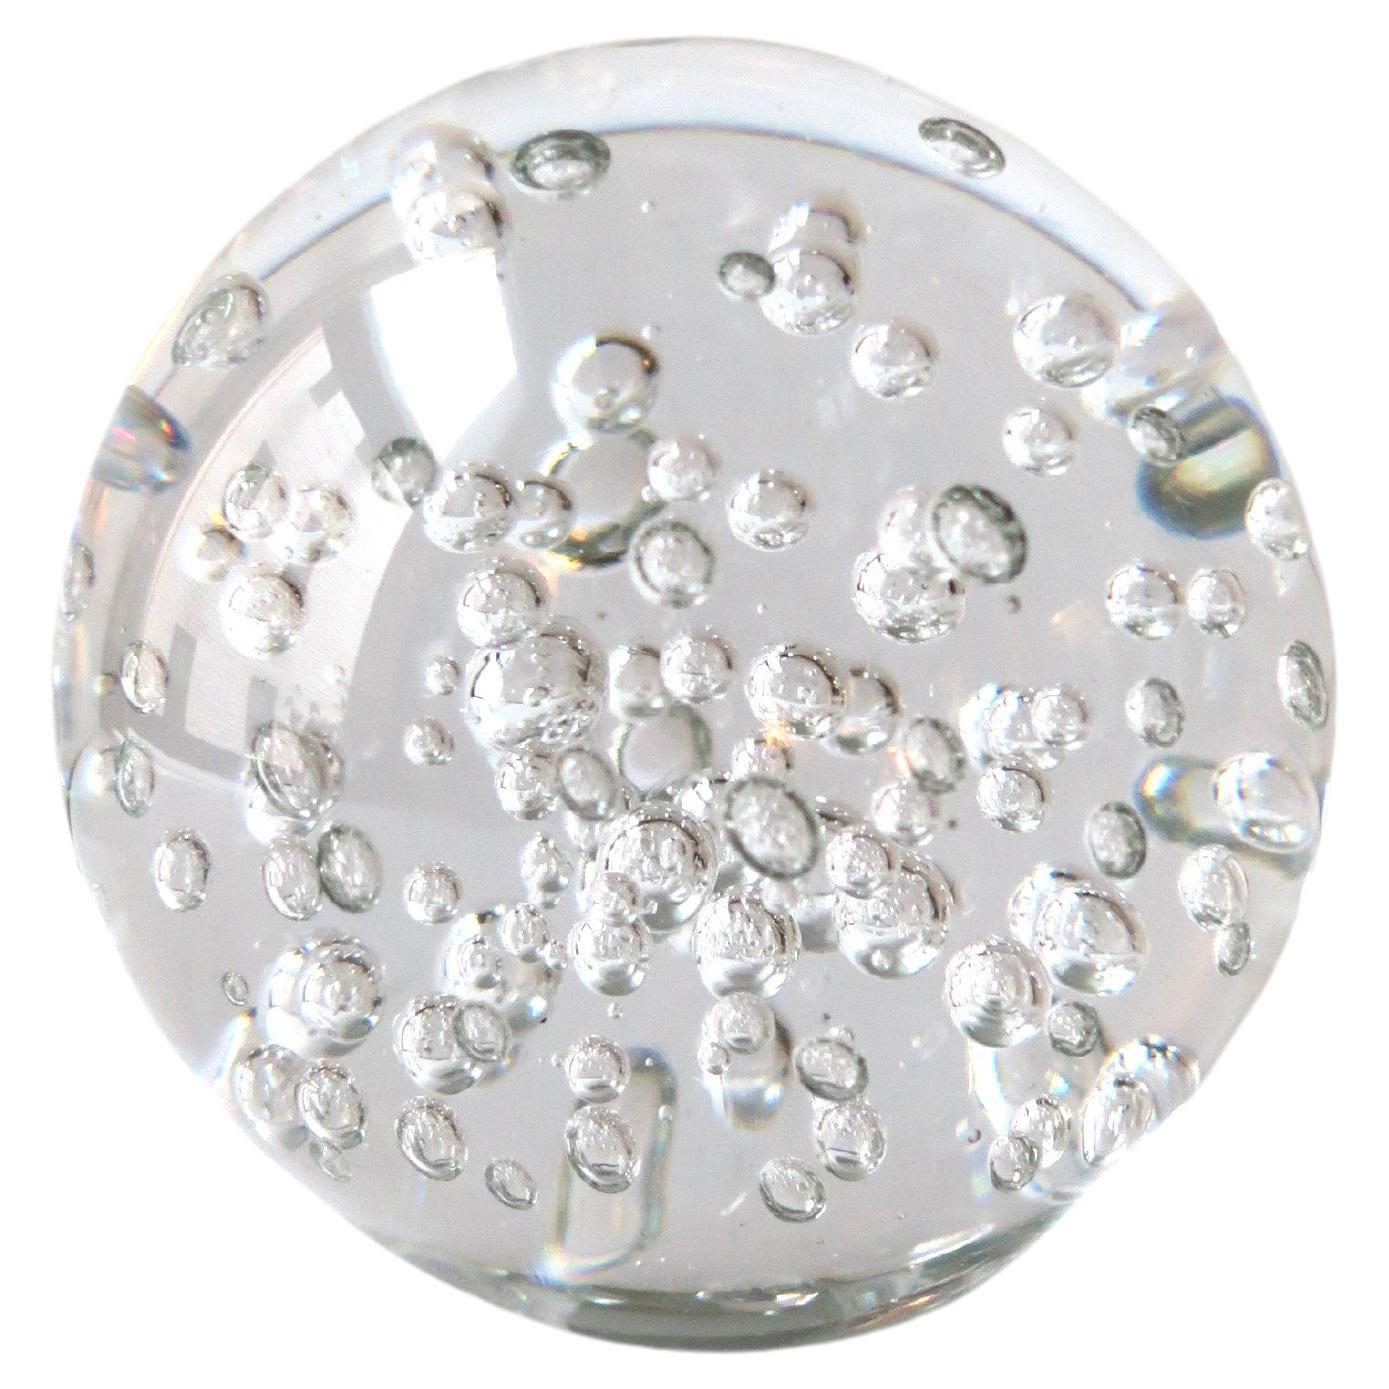 Art Glass Ball Sphere with Bubble Design, Large